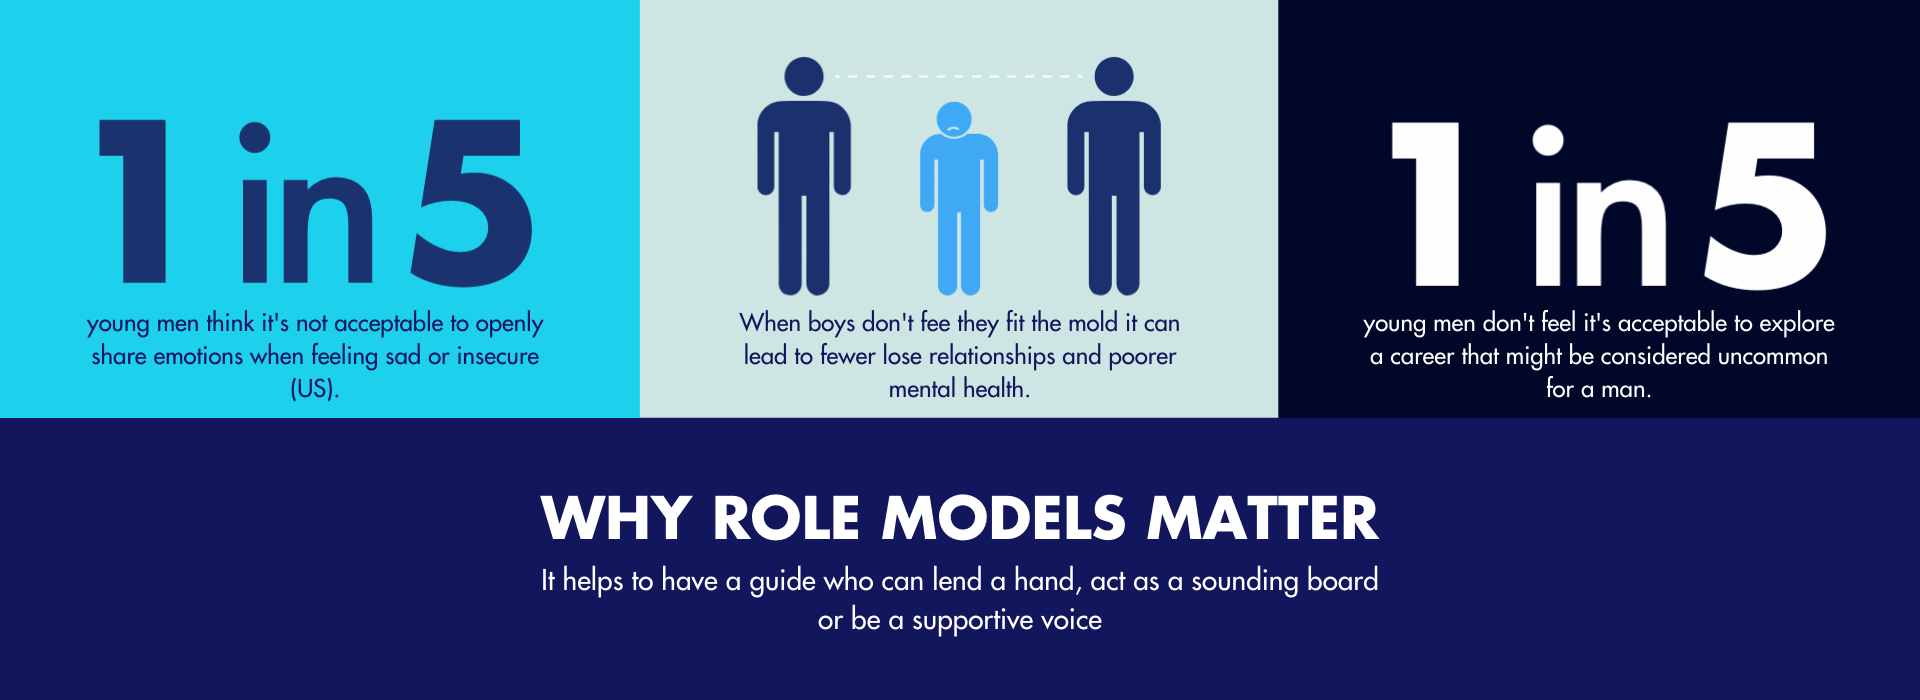 Why role models matter. It helps to have a guide who can lend a hand, act as a sounding board or be a supportive voice.